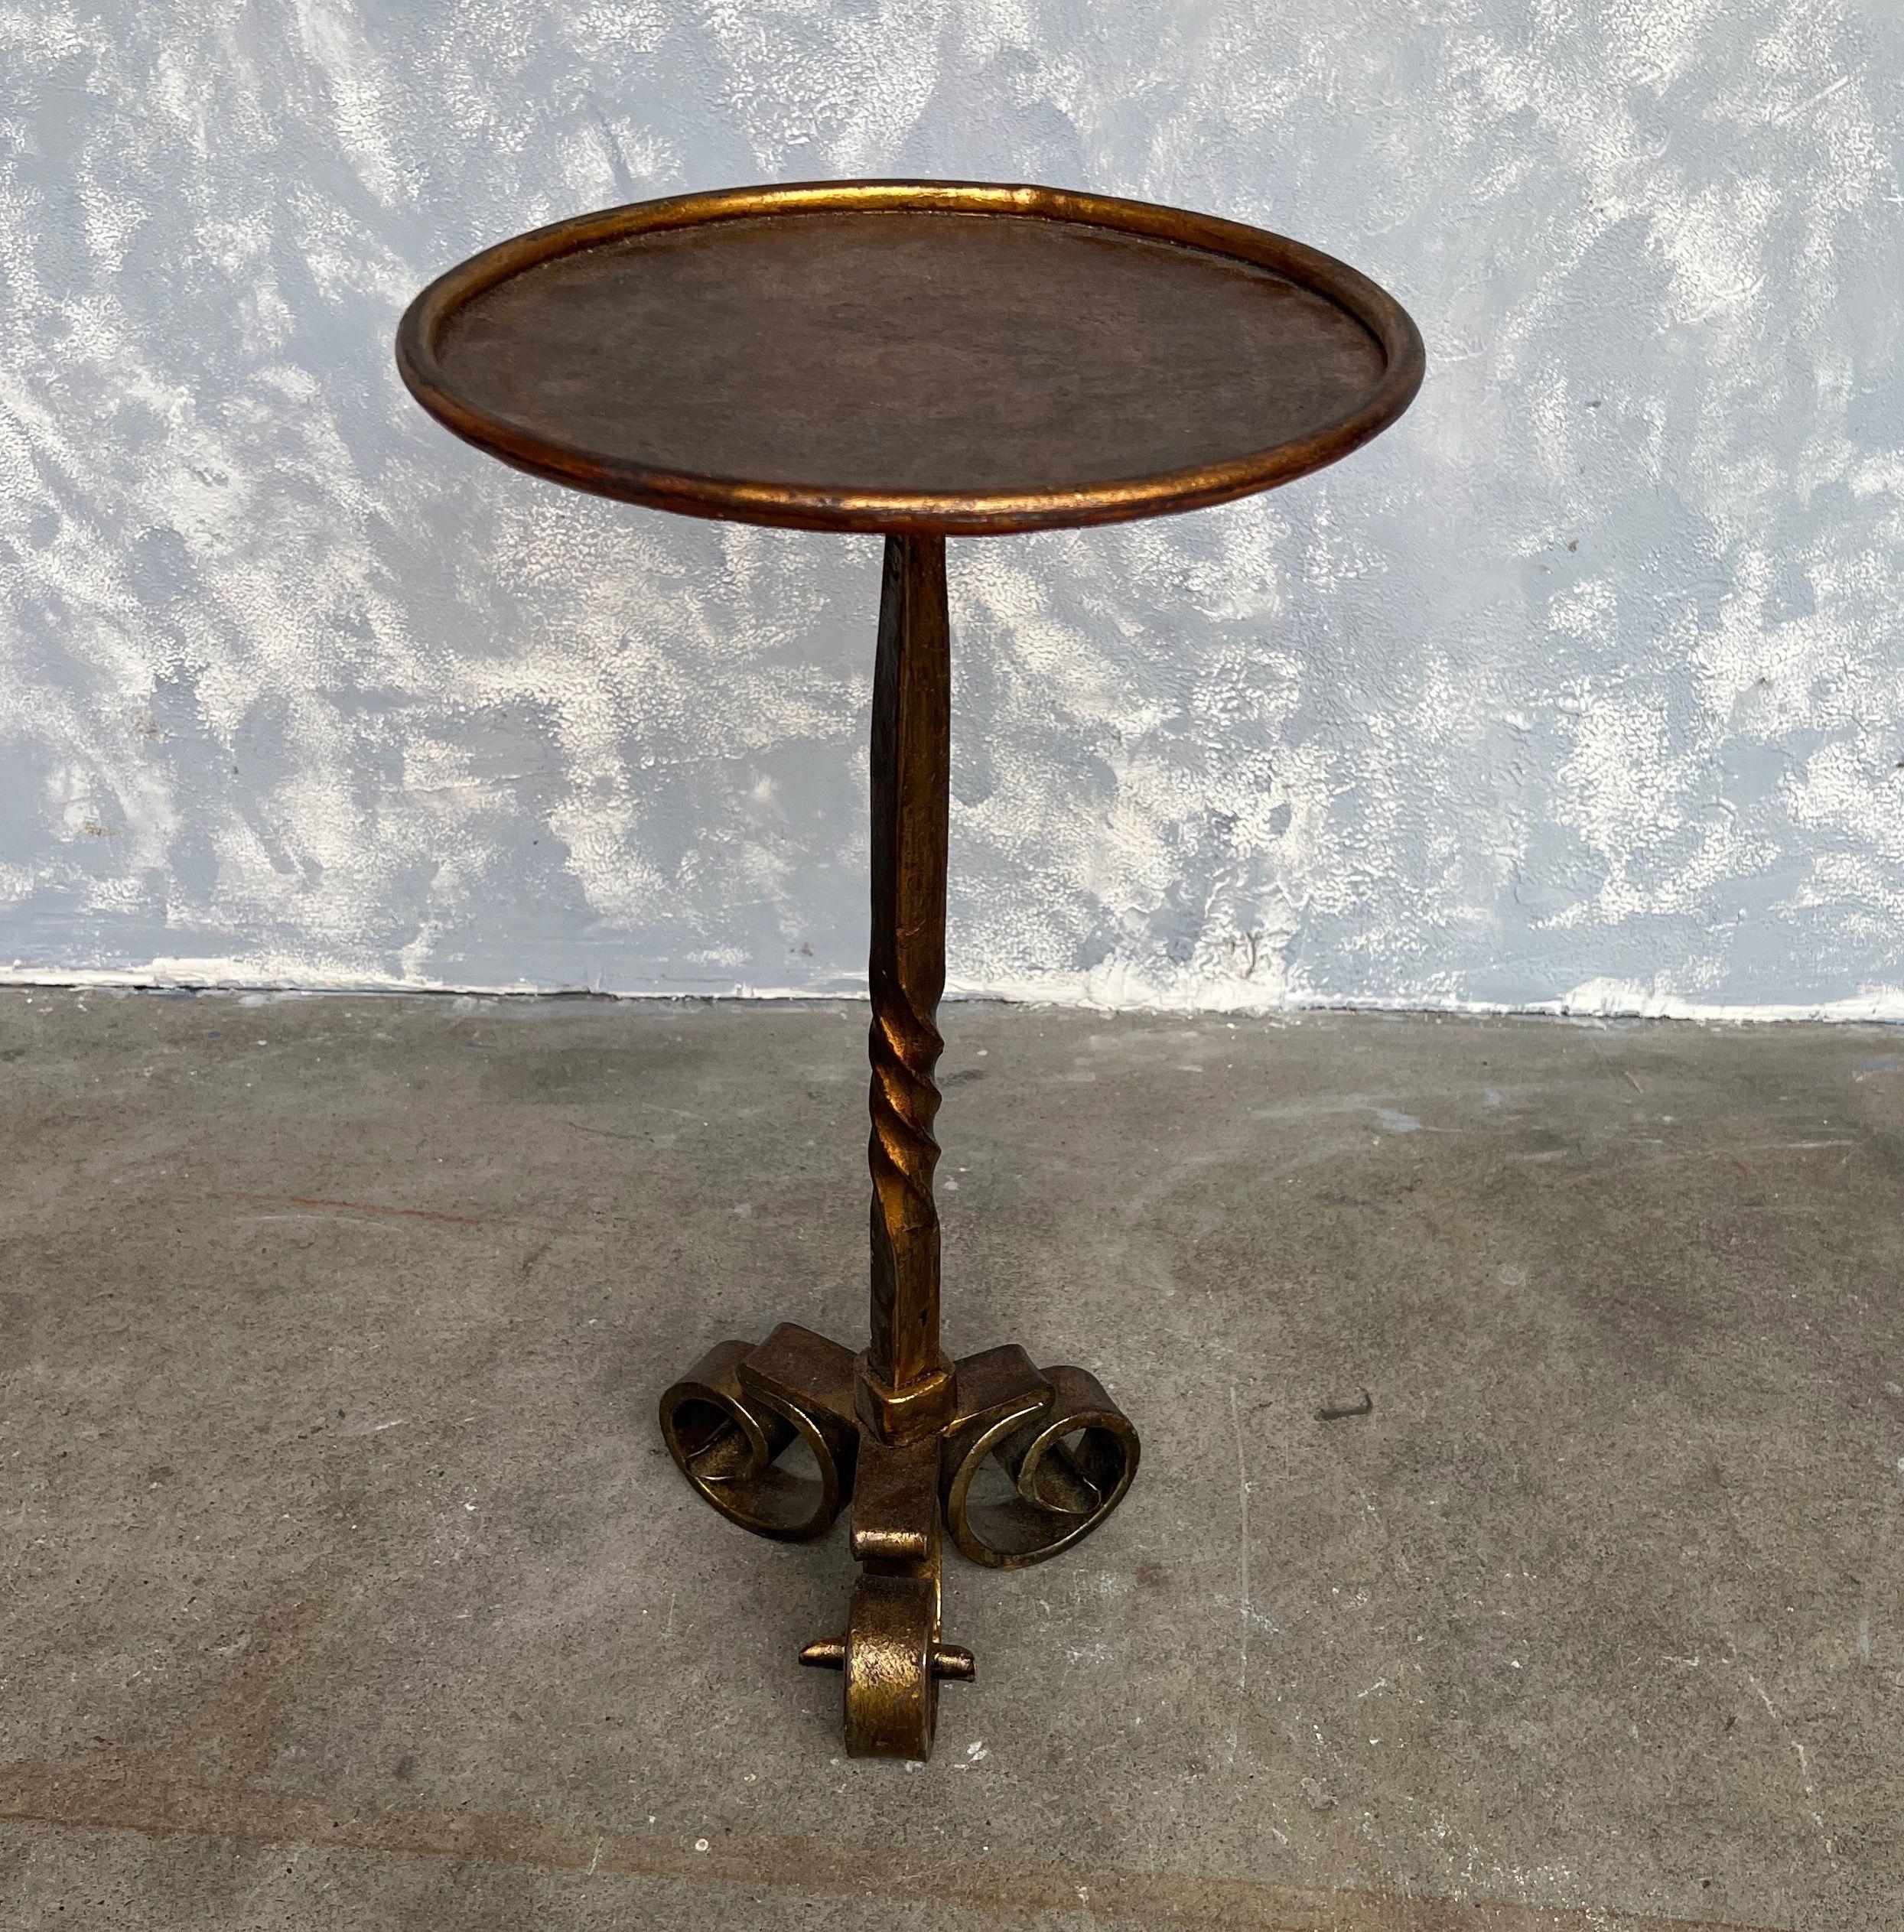 This small intricately decorated gilt iron drinks table features a tripod base complete with curled feet. The central stem presents an intriguing twist detail, supporting a gilt round top encased in a simple rolled ringed border. A hand-applied gold